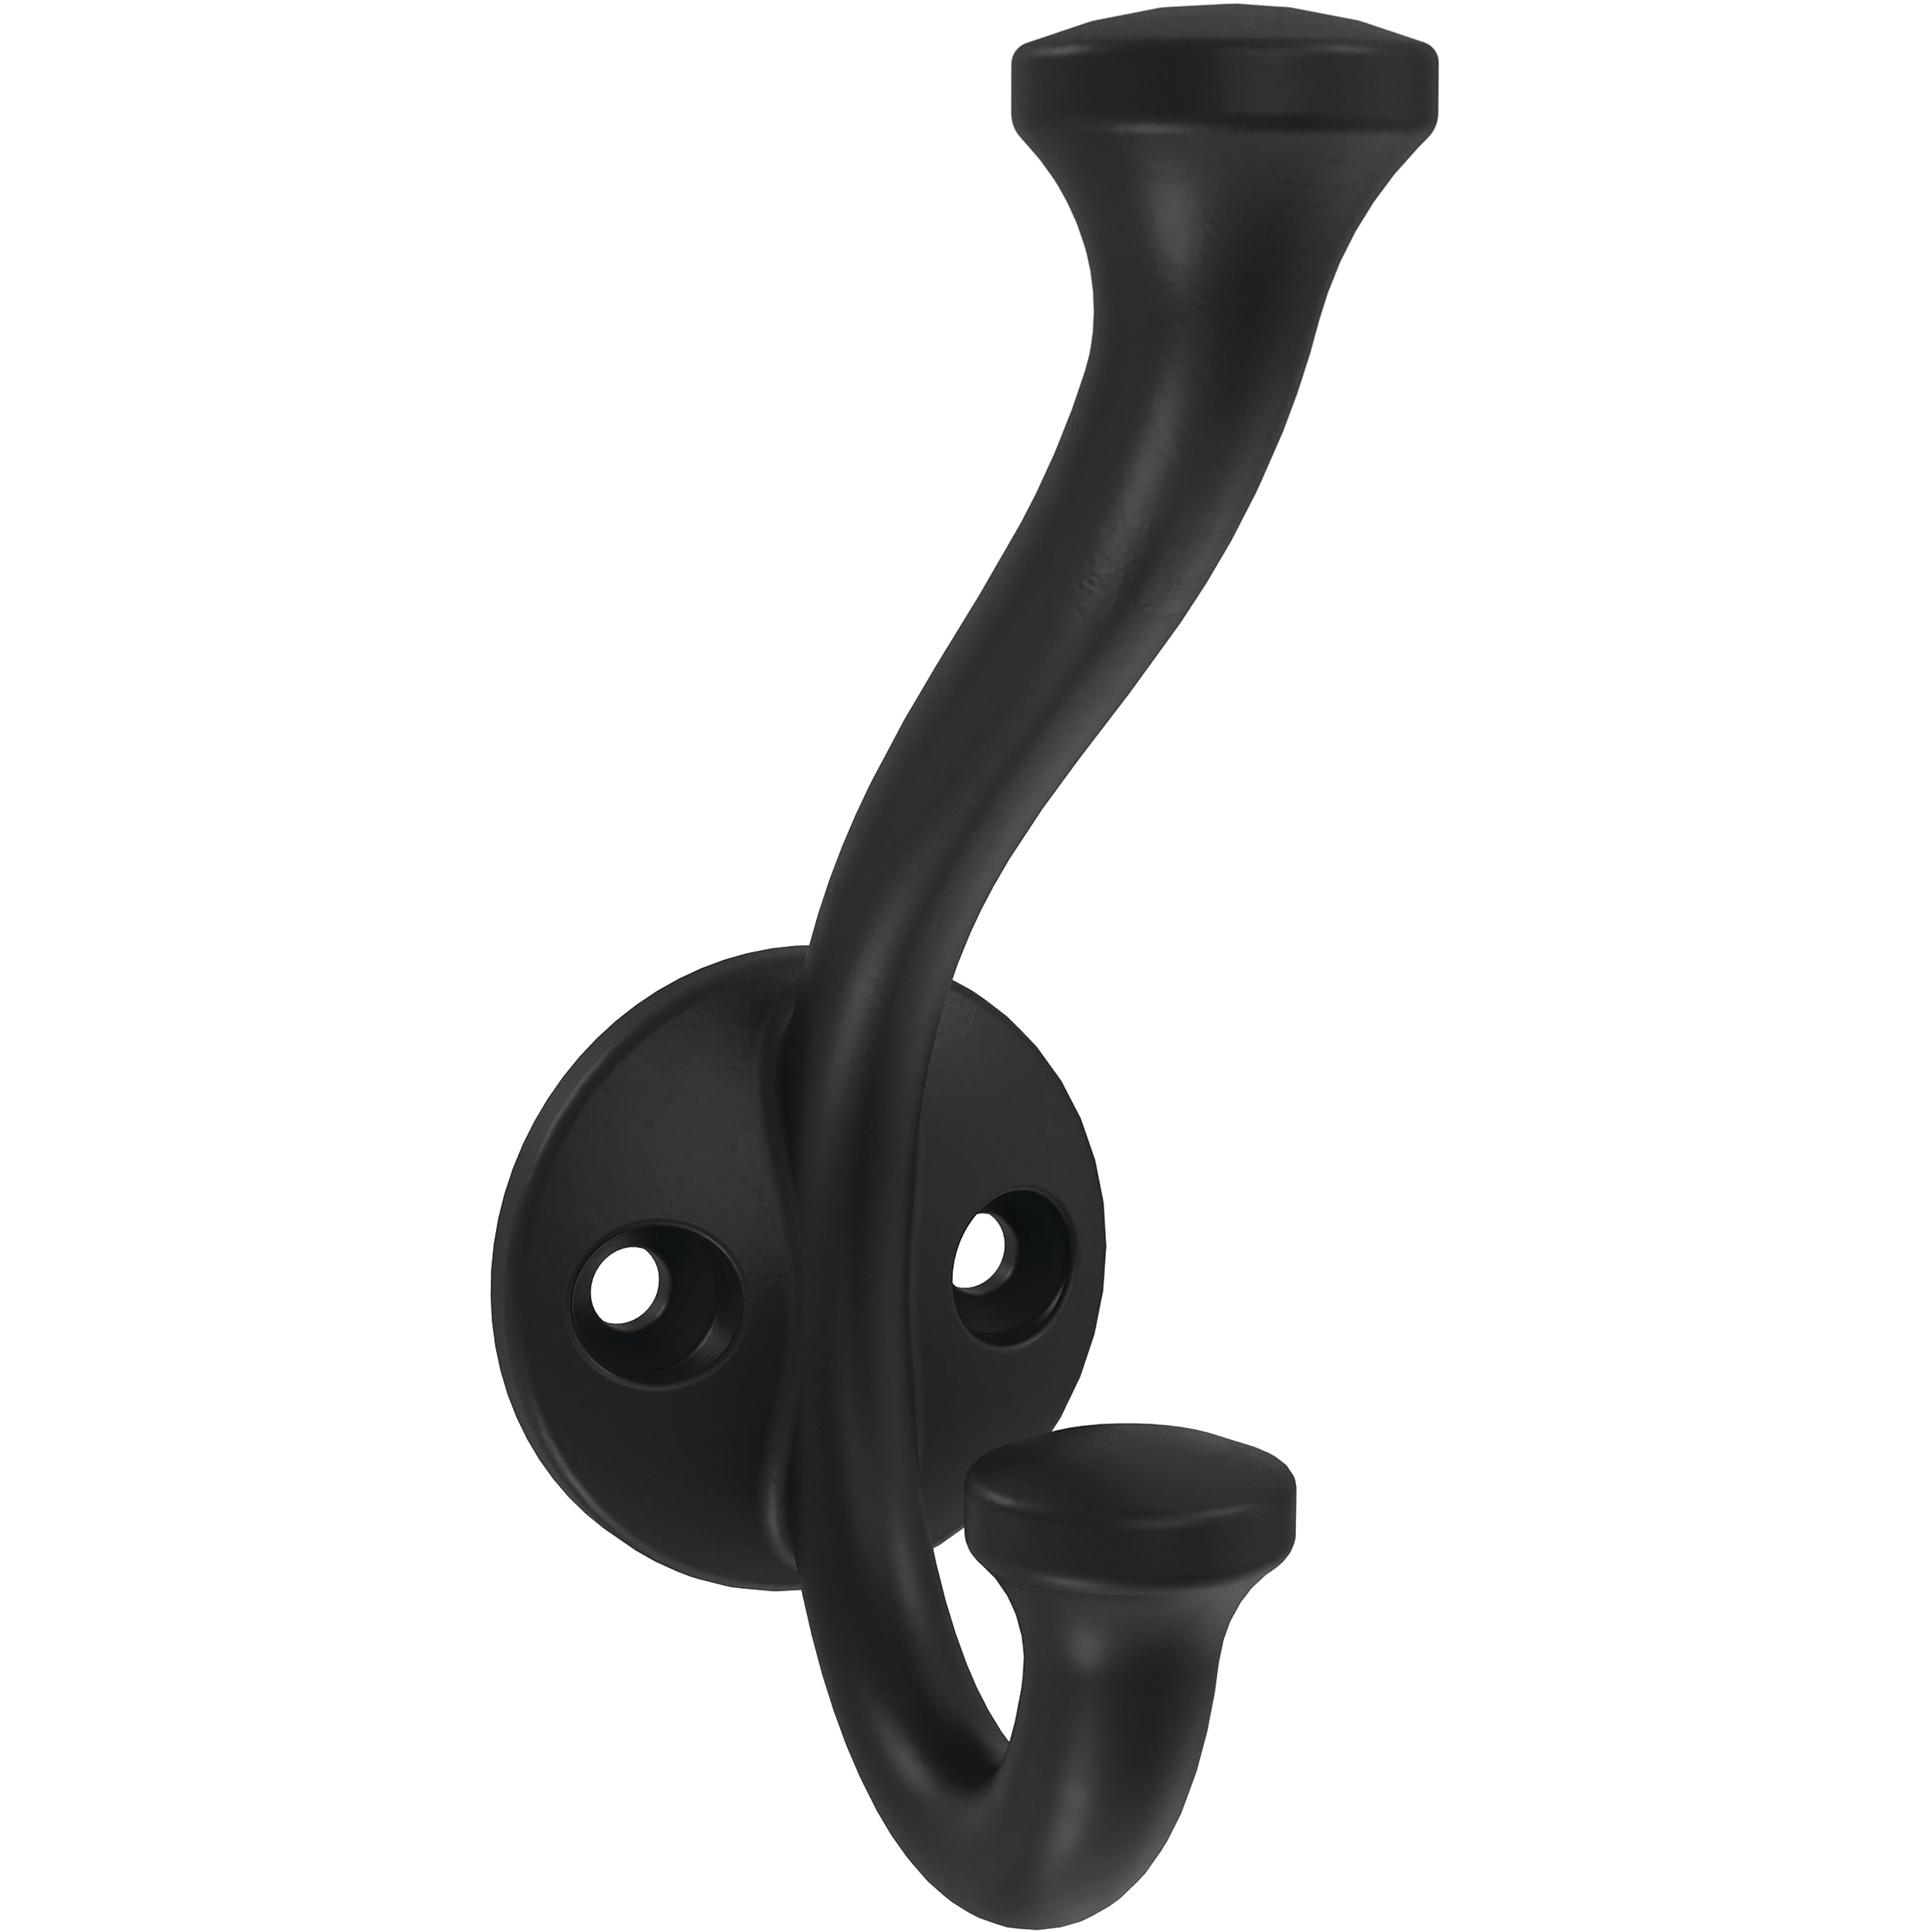 5 Pack Black Decorative Wall Hooks at